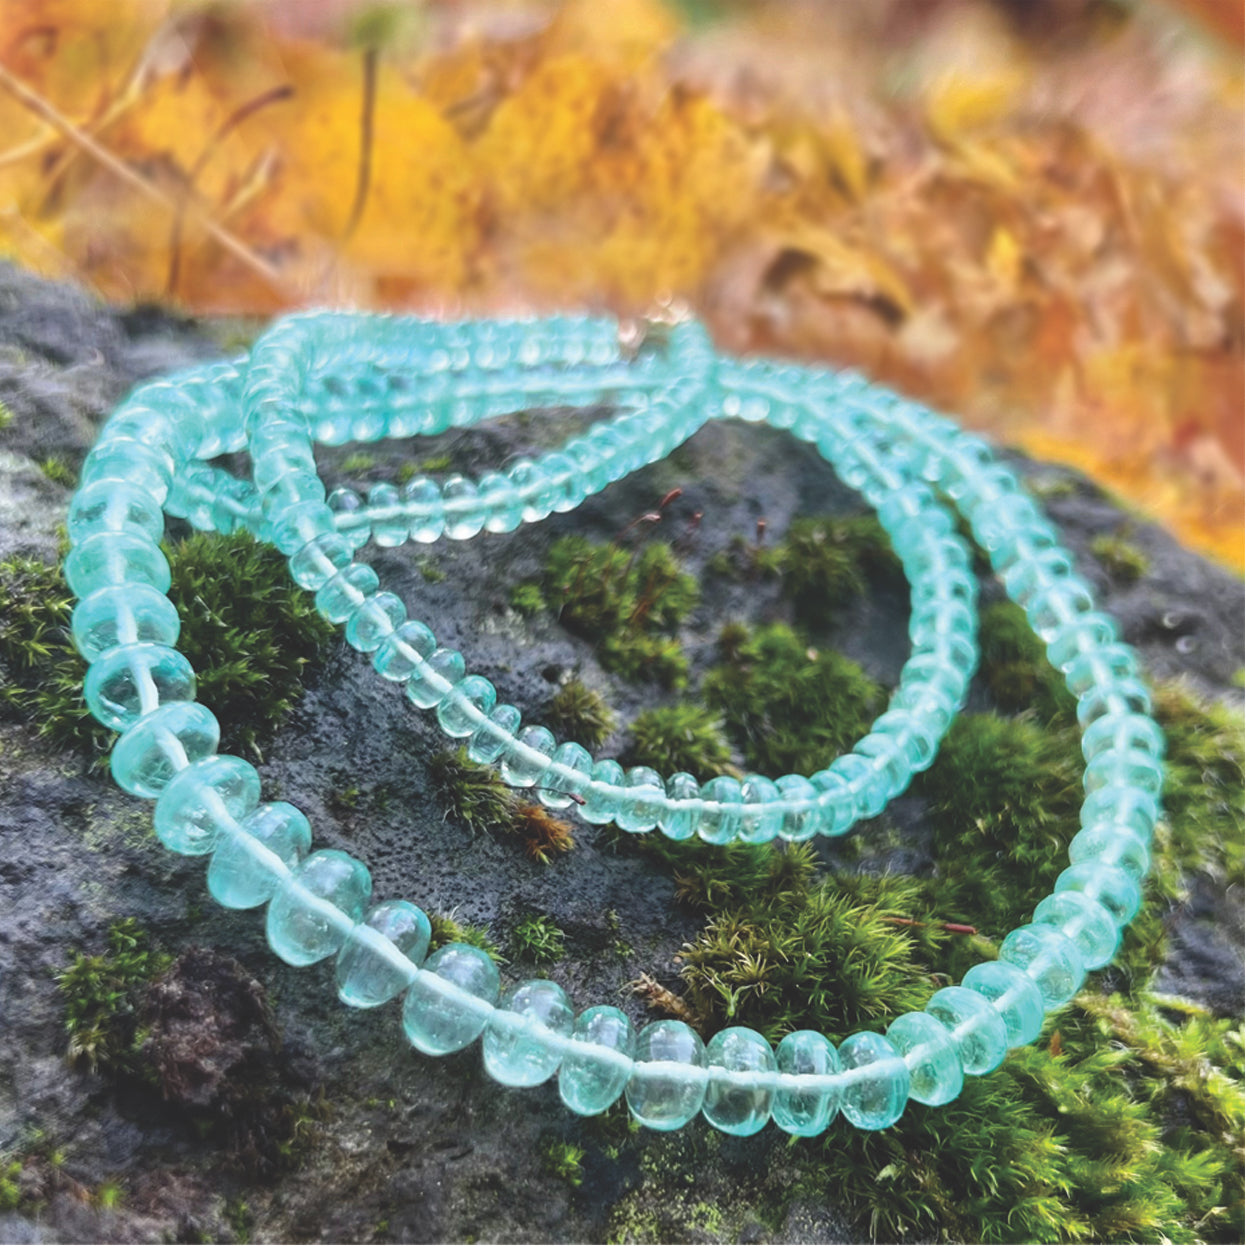 Turquoise Beryl Necklace known for helping you access your subconscious wisdom and knowledge